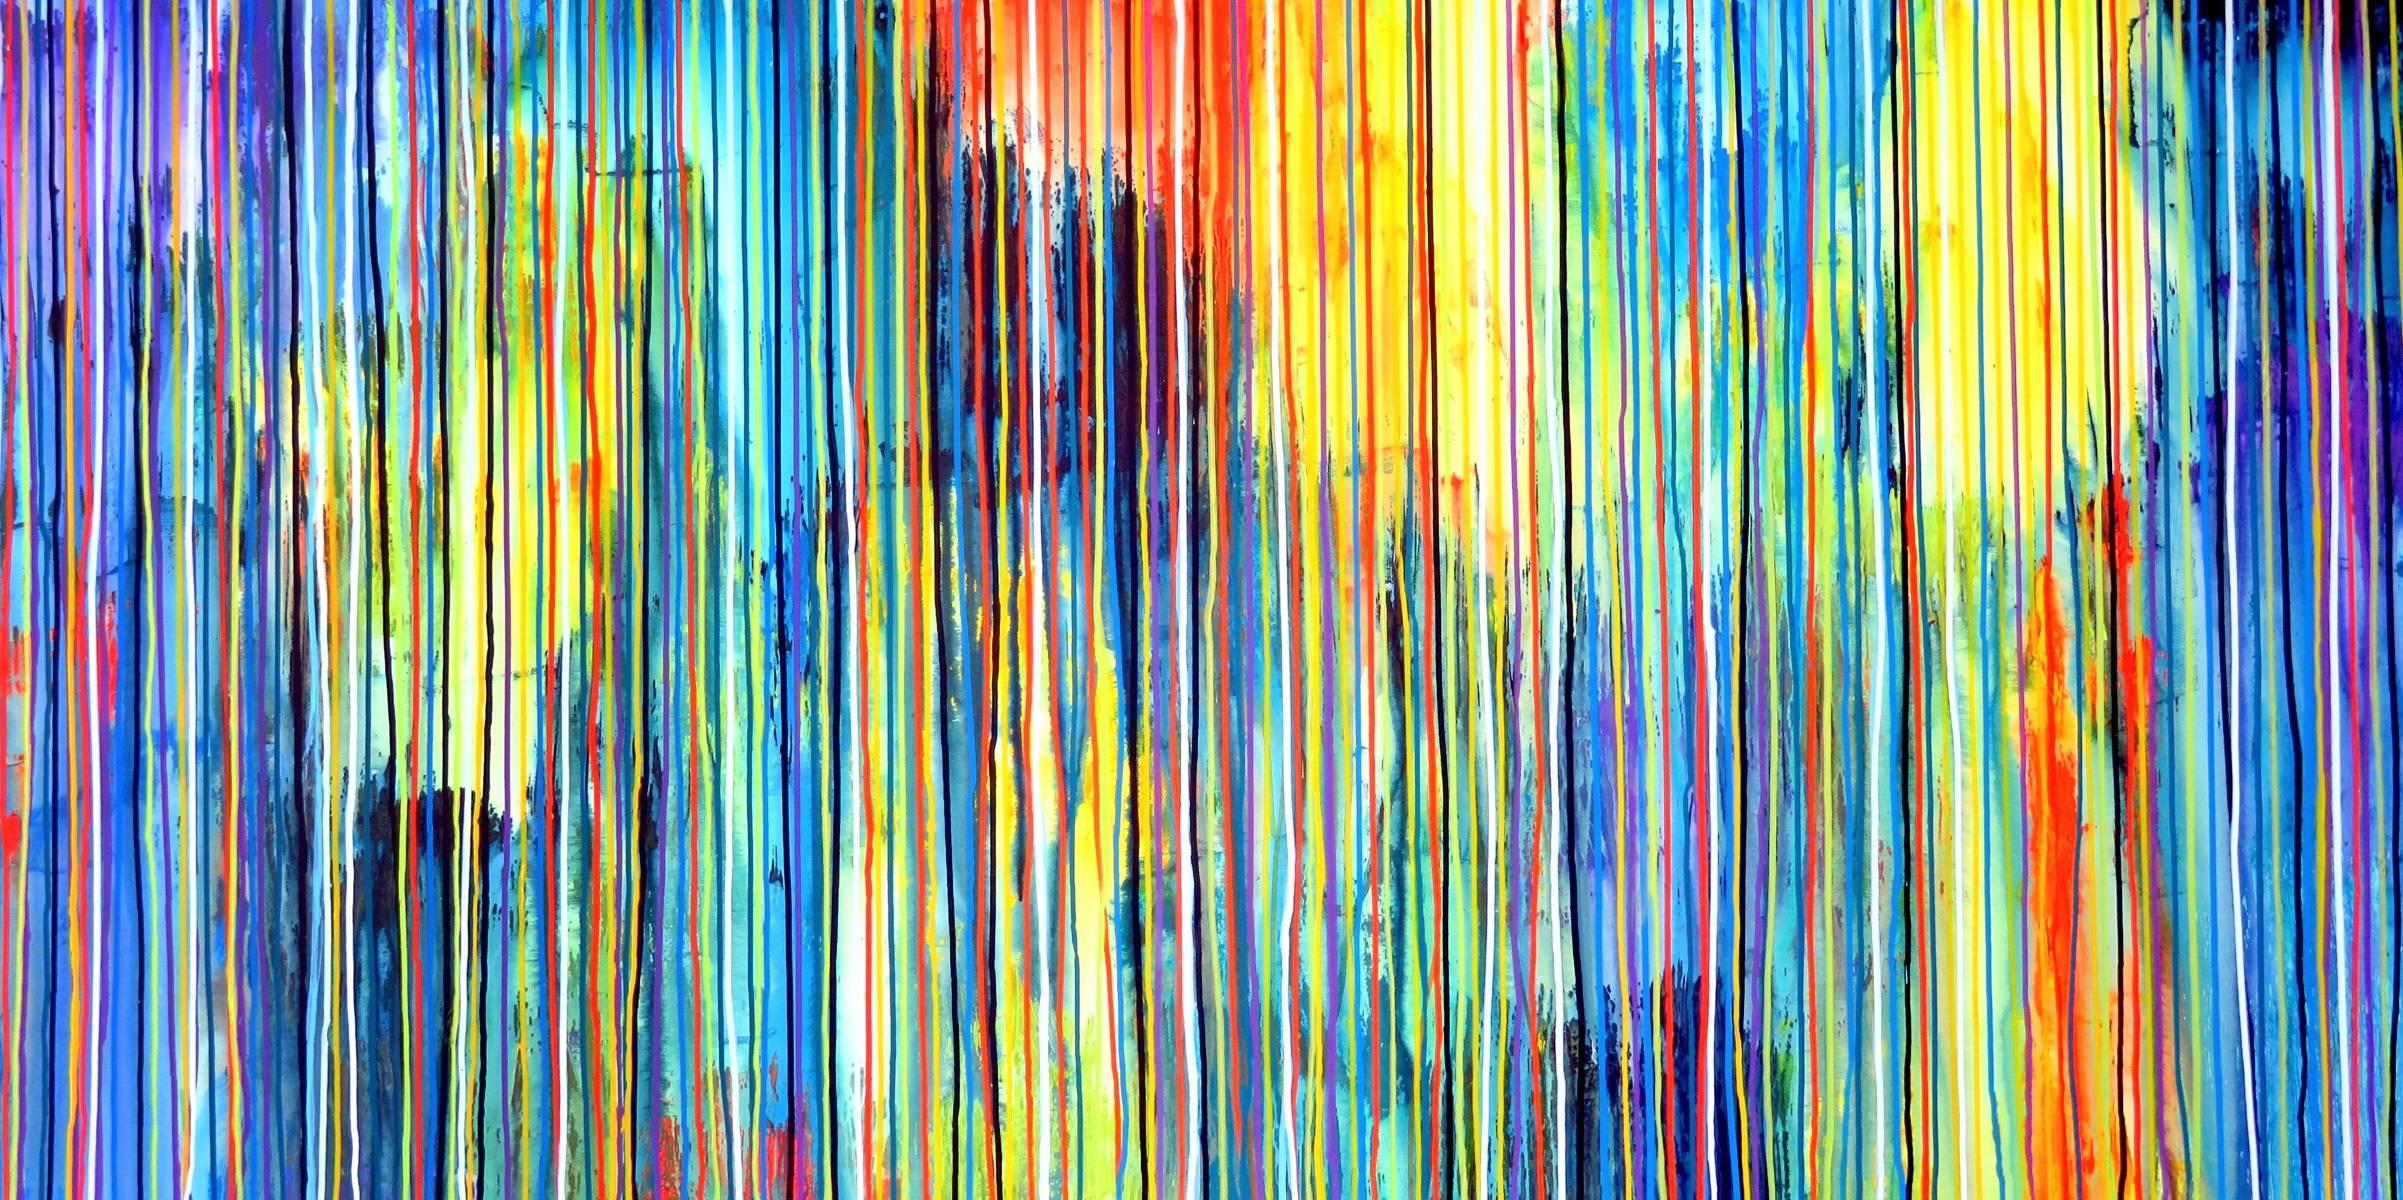 Abstract and contemporary painting by Portuguese artist, Carla Sá Fernandes. With vibrant, intense and explosive colors, this modern piece is perfect for any collection. A high quality acrylic painting which is done on gallery wrapped canvas, with